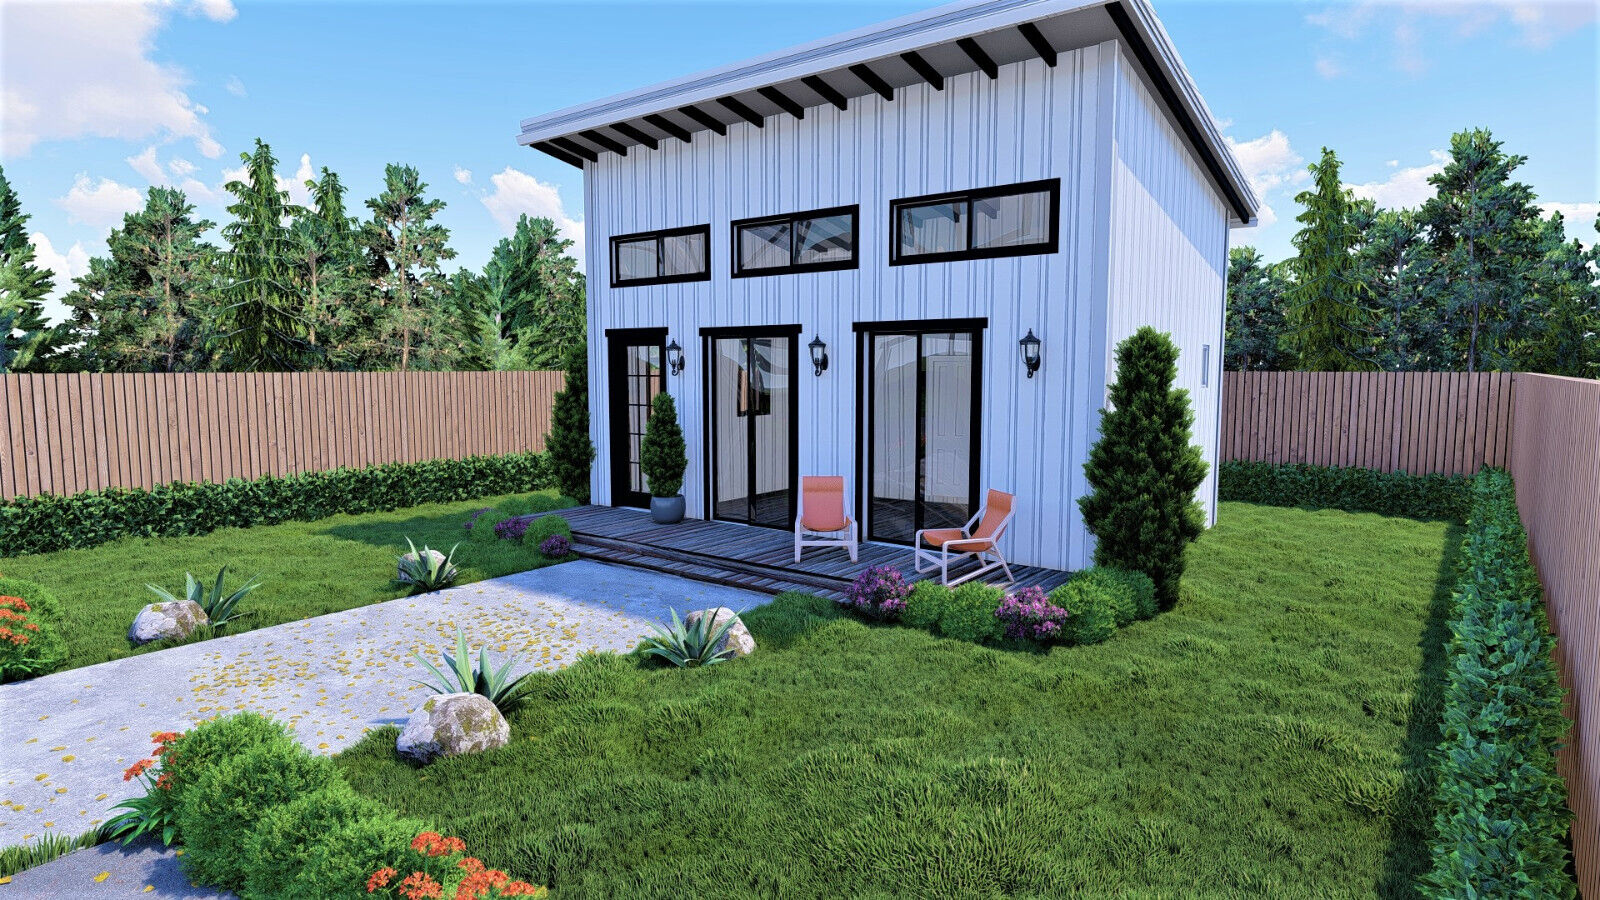 Custom 400.83 sq.ft Tiny Cabin Plan 1 Bedroom & 1 Bathroom With Free CAD File